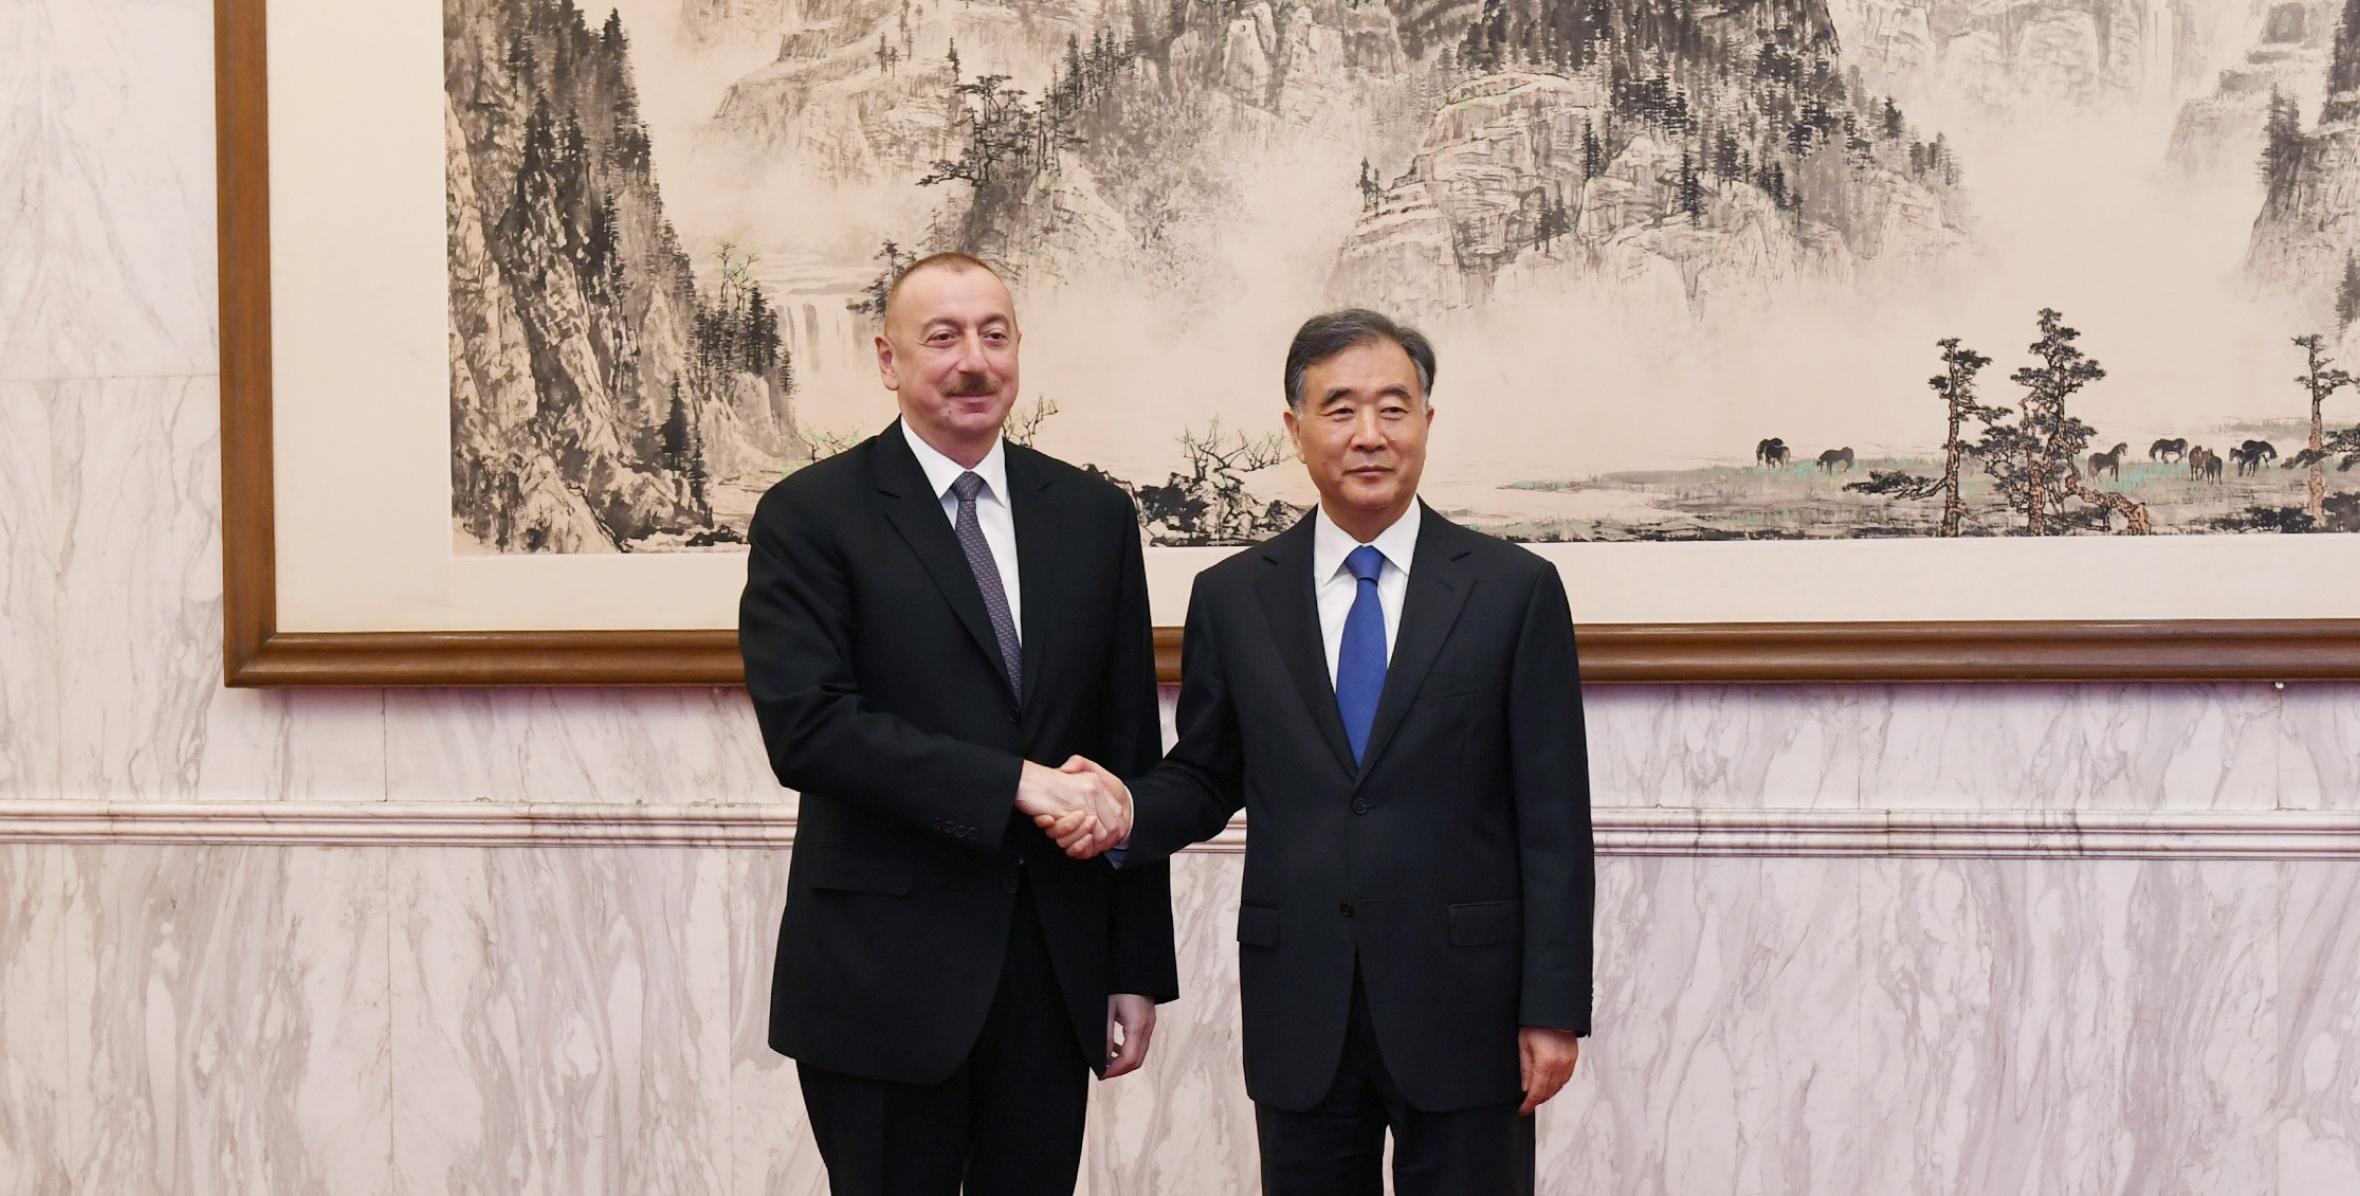 Ilham Aliyev met with member of Political Bureau of Communist Party of China Central Committee Wang Yang in Beijing